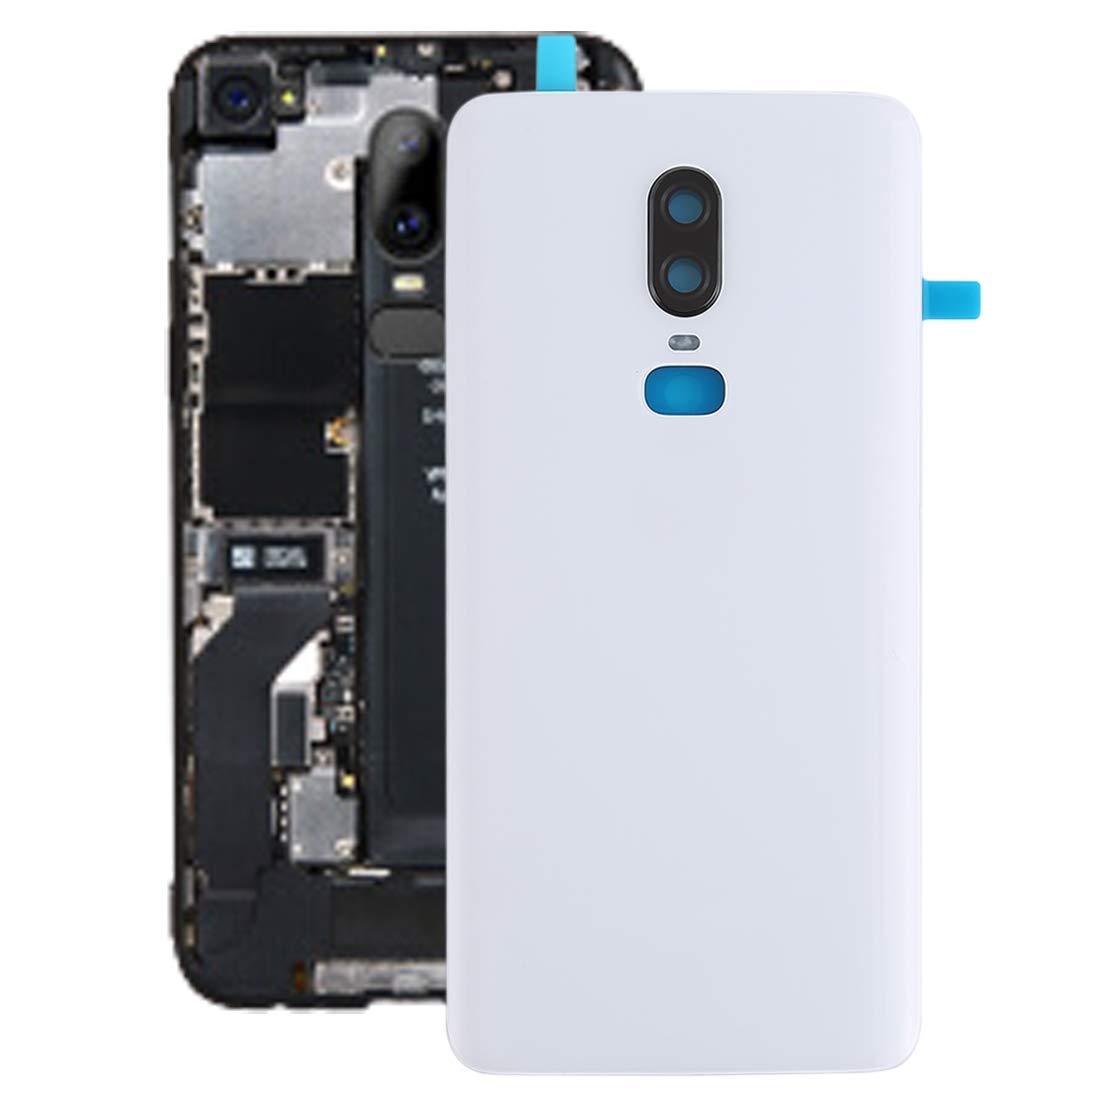 Back Glass Panel for Oneplus 6 White